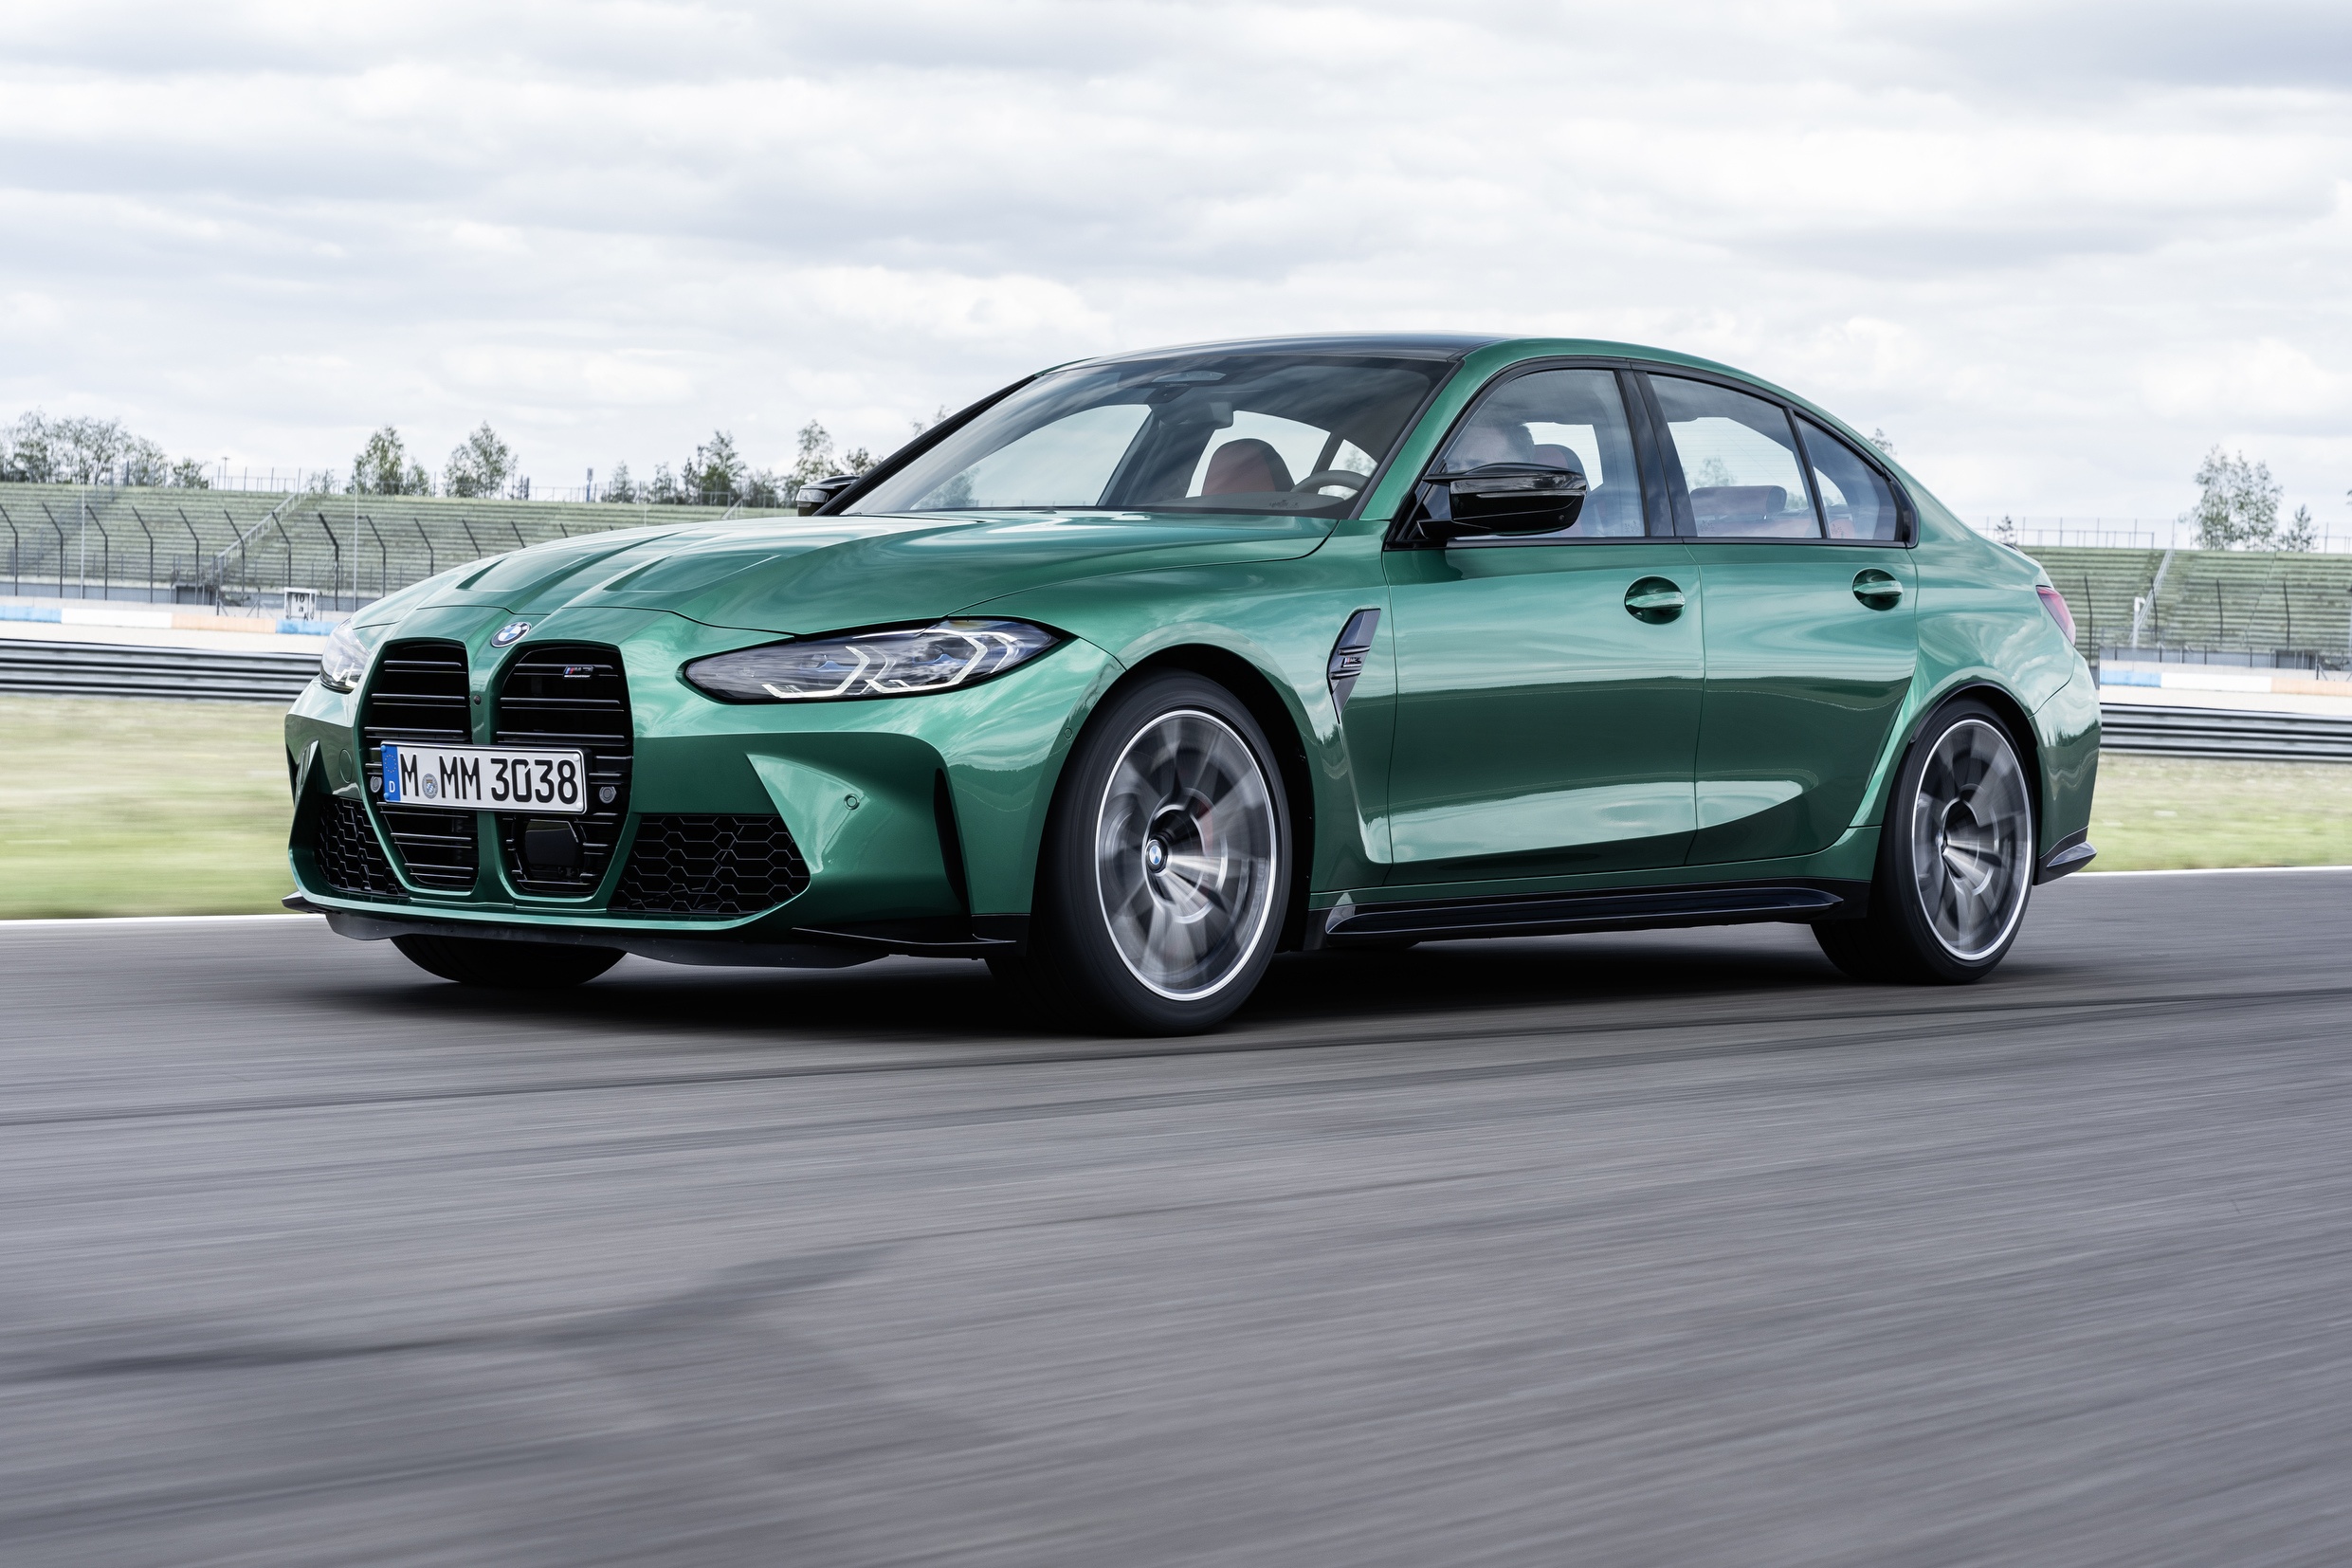 BMW M GmbH still on its path of sustained growth in 2020